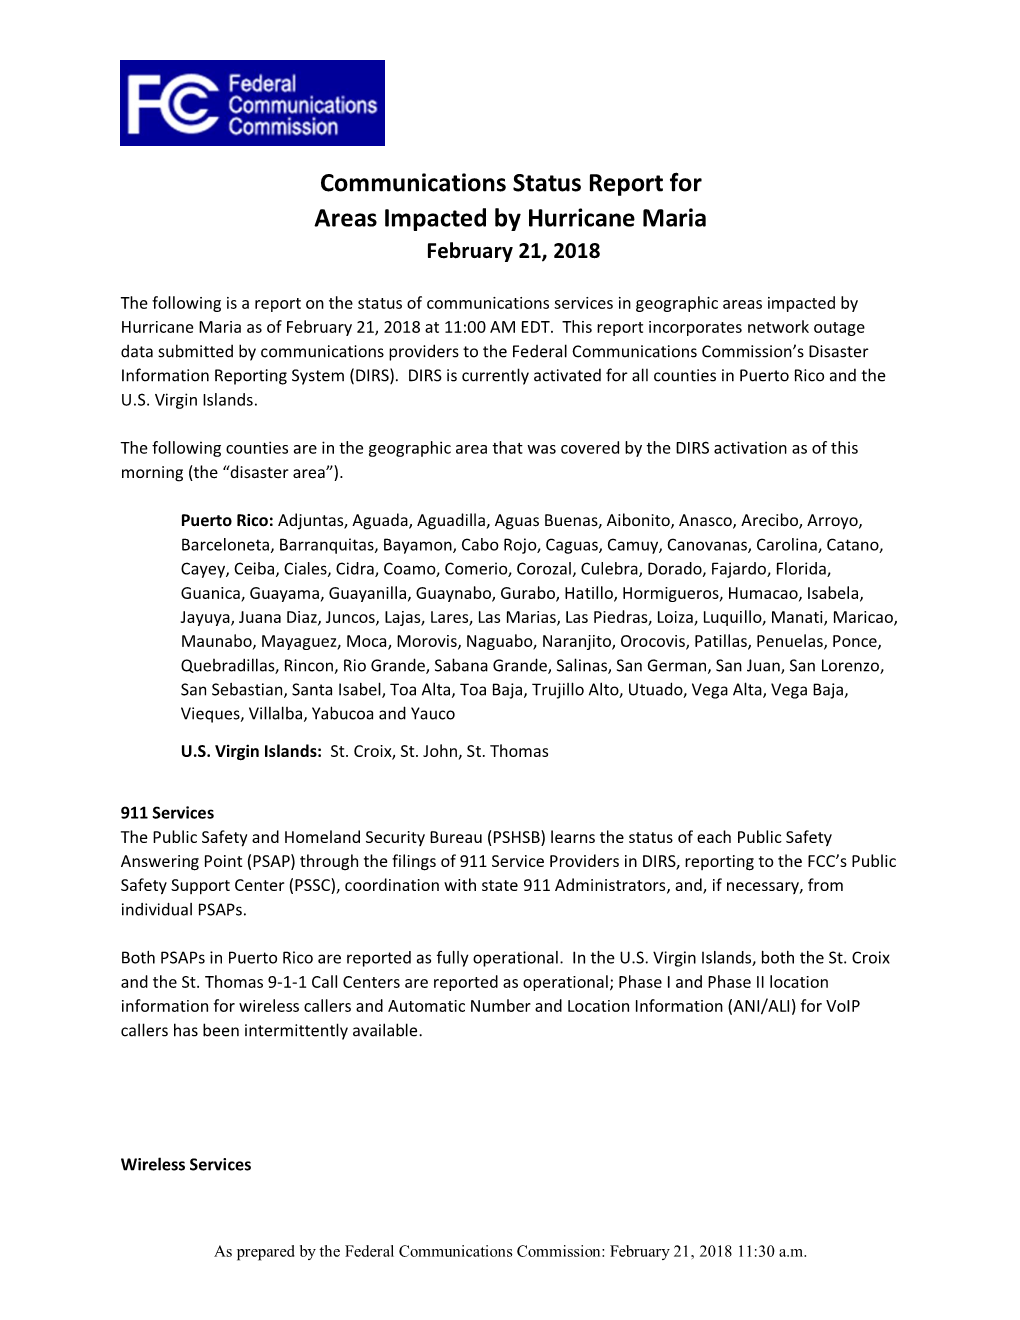 Communications Status Report for Areas Impacted by Hurricane Maria February 21, 2018